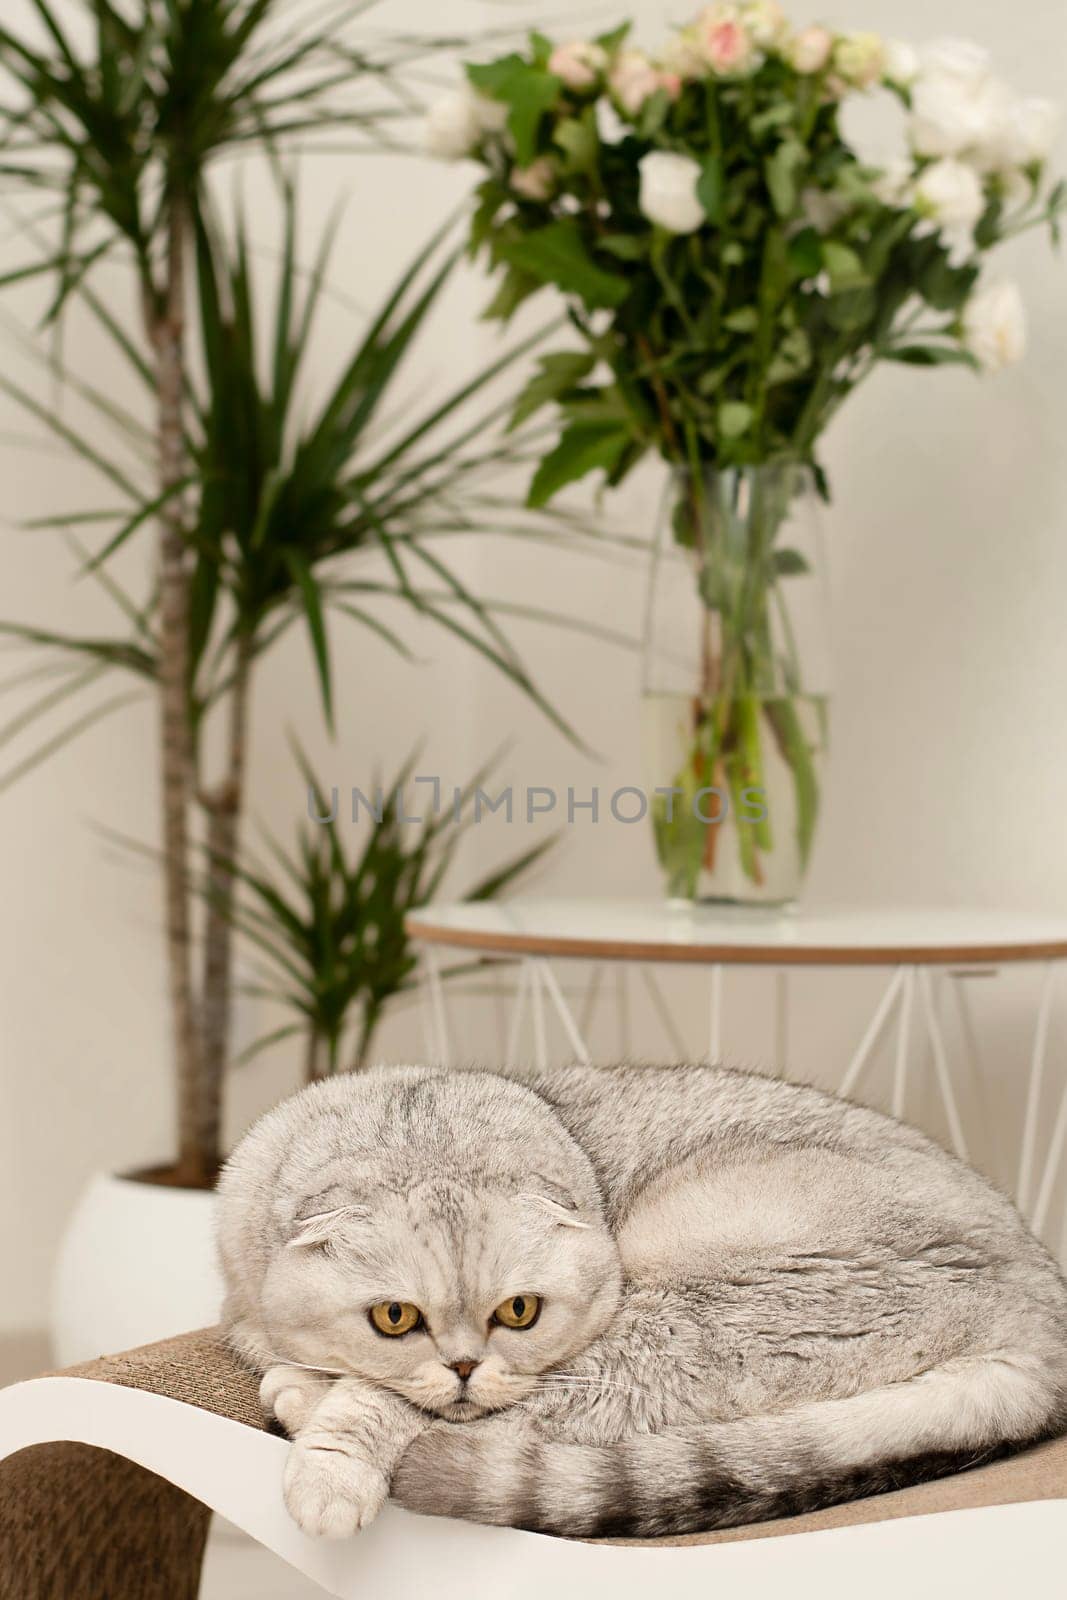 Domestic fluffy gray cat, Scottish Fold breed, lies on a claw sharpener against the background of a vase of flowers in a home interior. Vertical